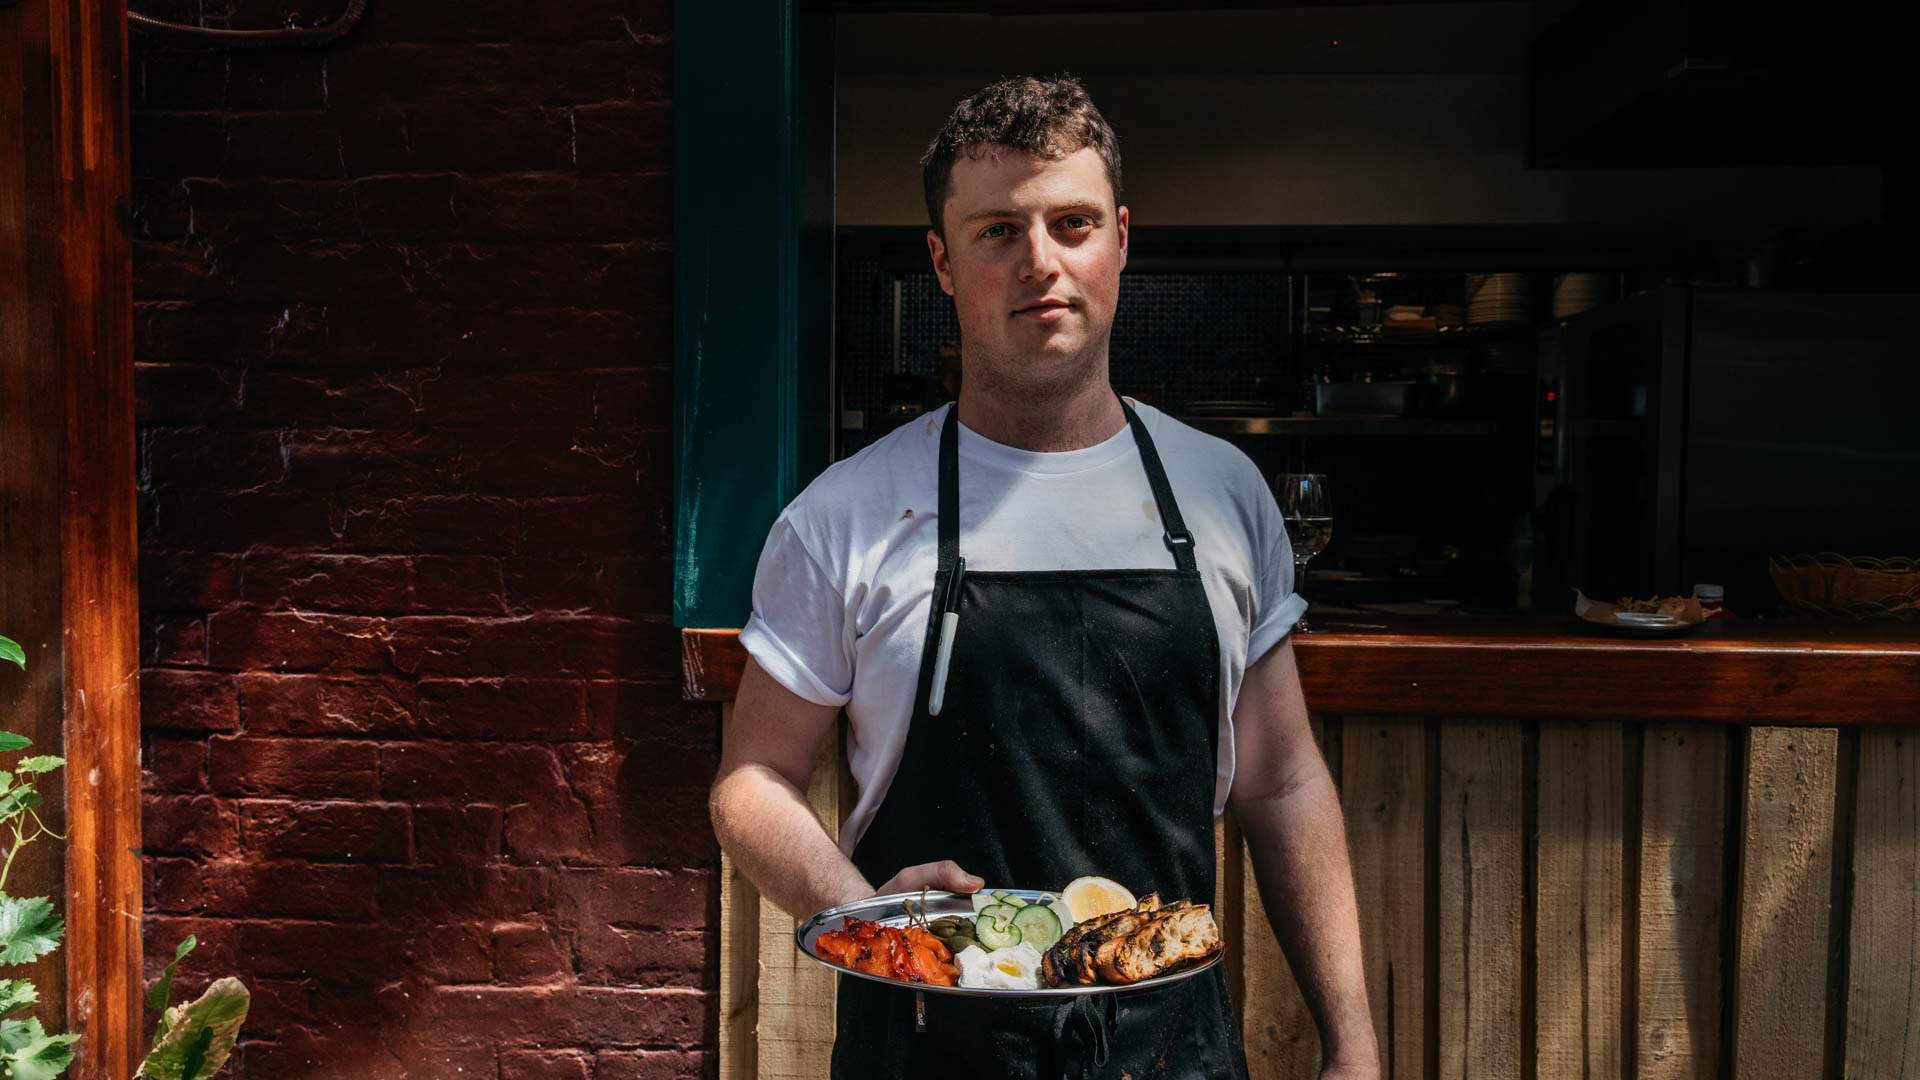 The New-Look Duke of Enmore Is Serving Up Next-Level Pub Grub and Natural Wines